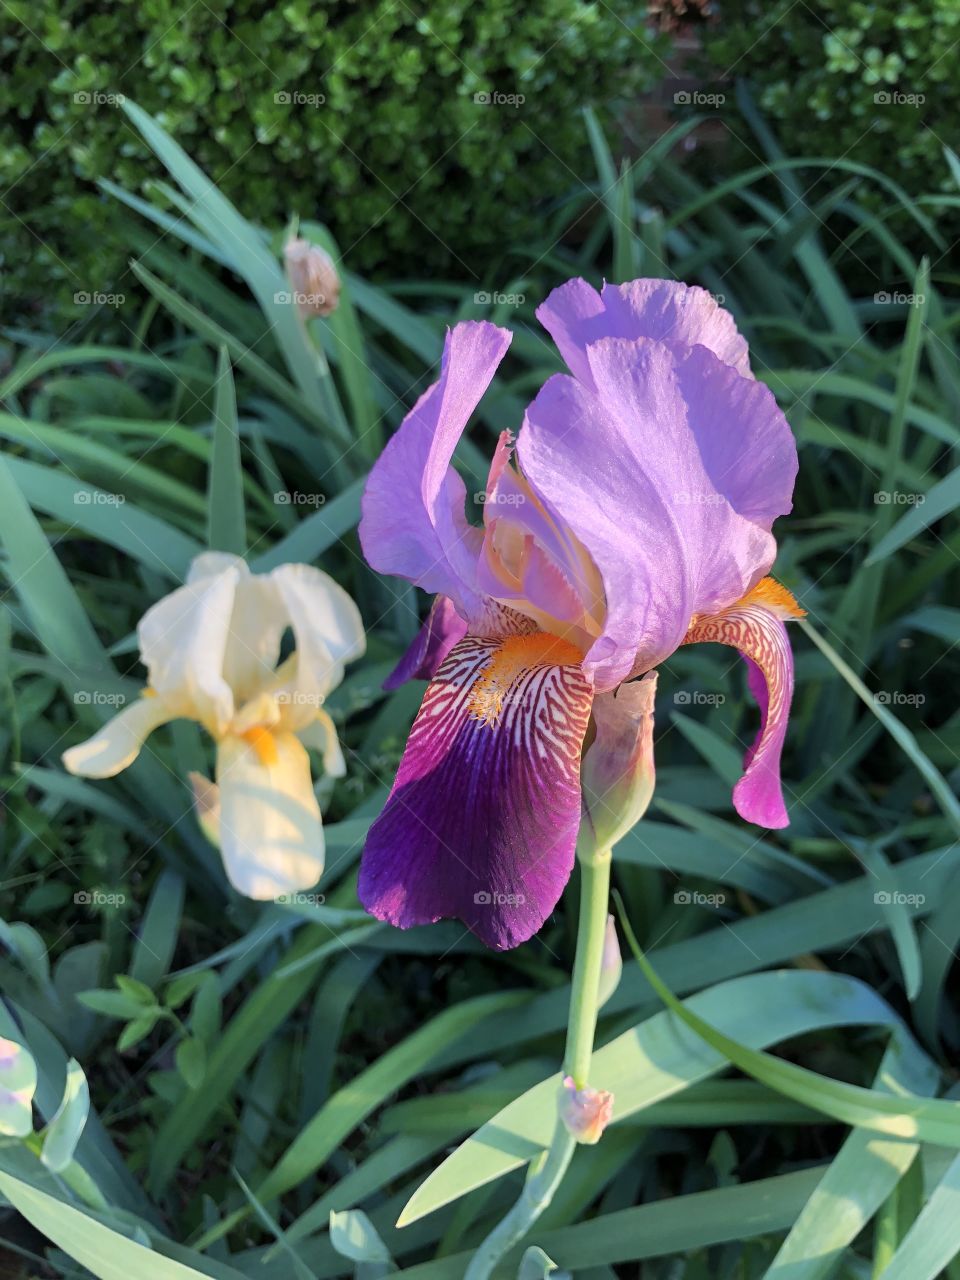 Yellow and purple irises displaying their beauty. 